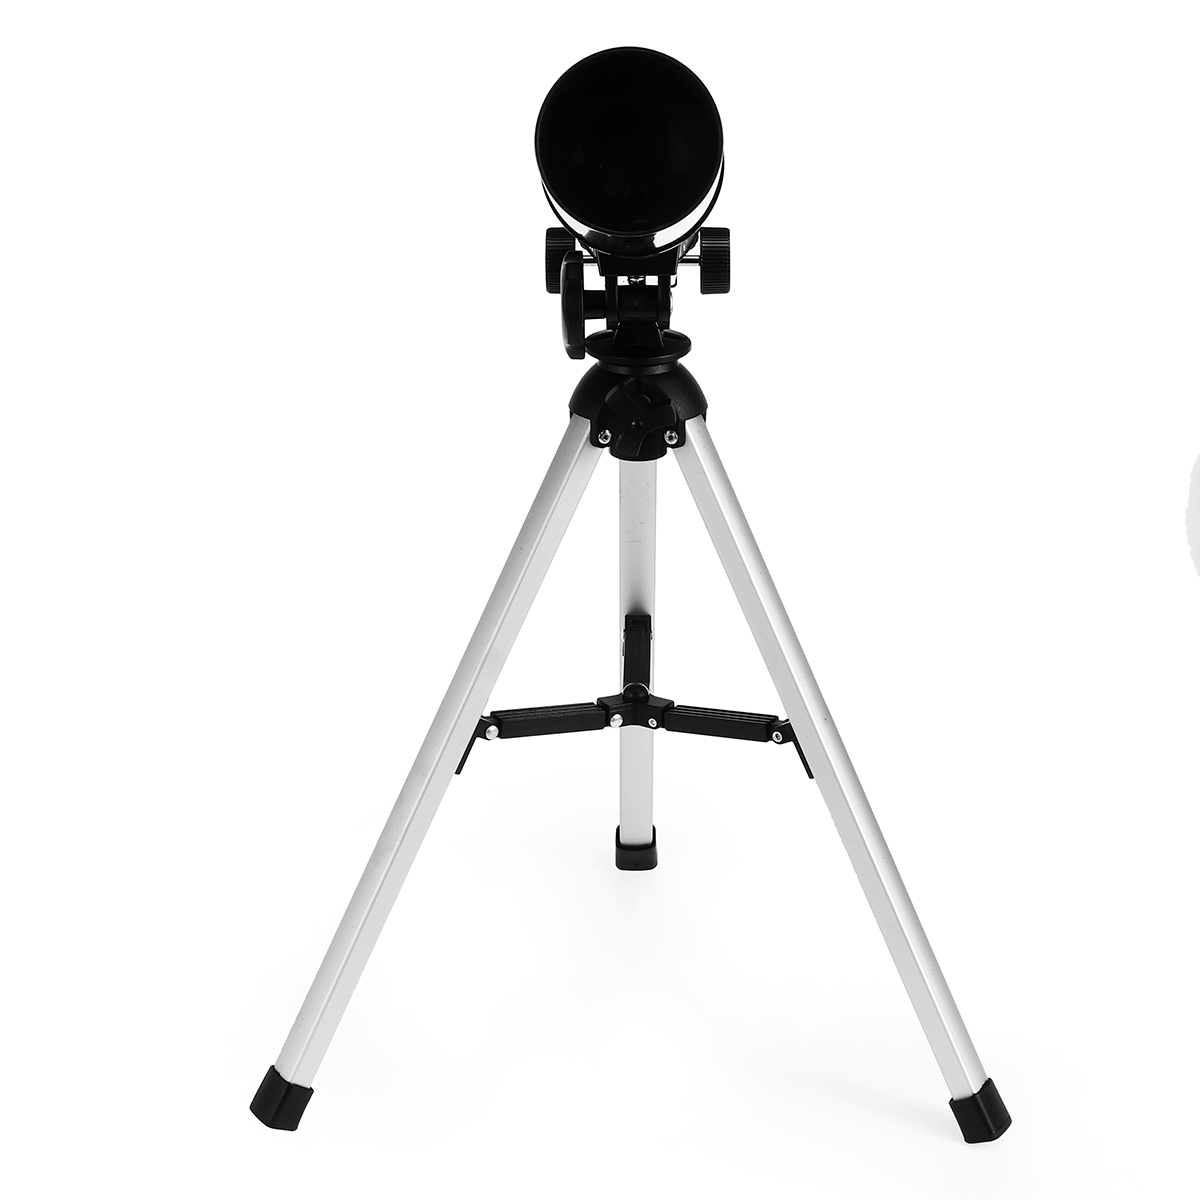 90x-Magnification-Astronomical-Telescope-Clear-Image-with-Remote-Control-and-Camera-Rod-for-Observe--1851121-6